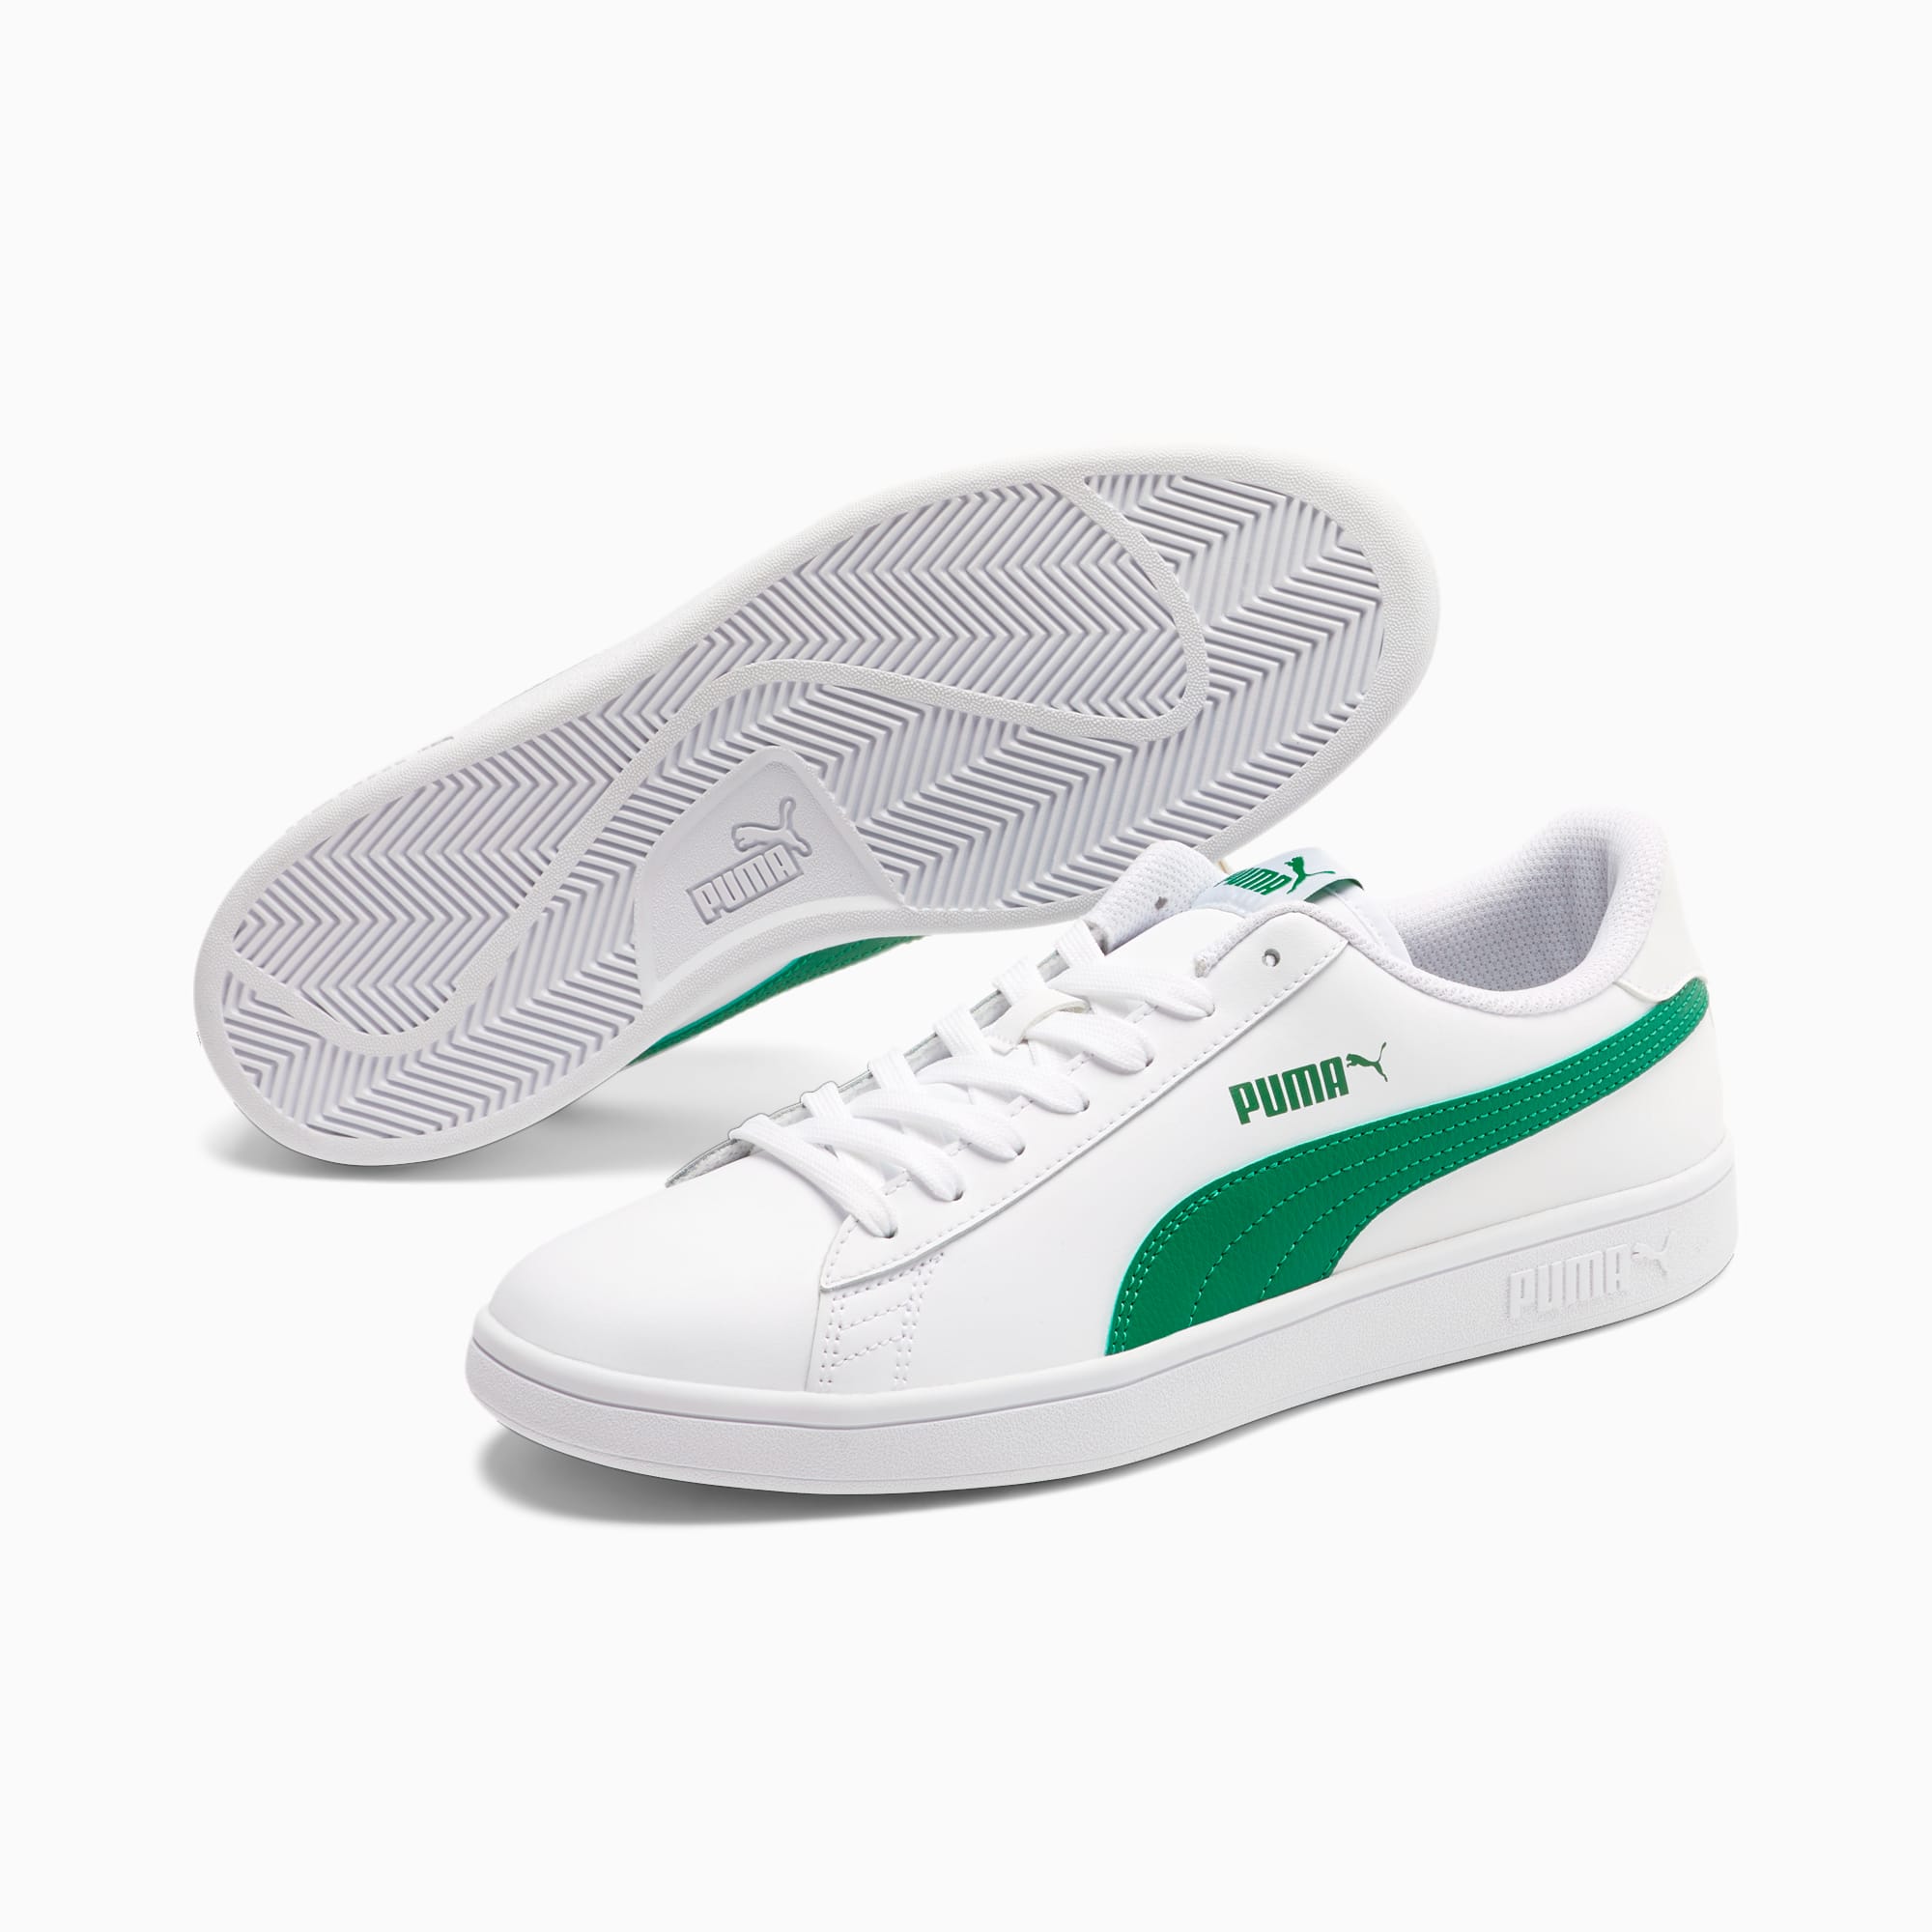 Puma Womens Smash V2 365208-01 White Casual Shoes Sneakers Size 9.5